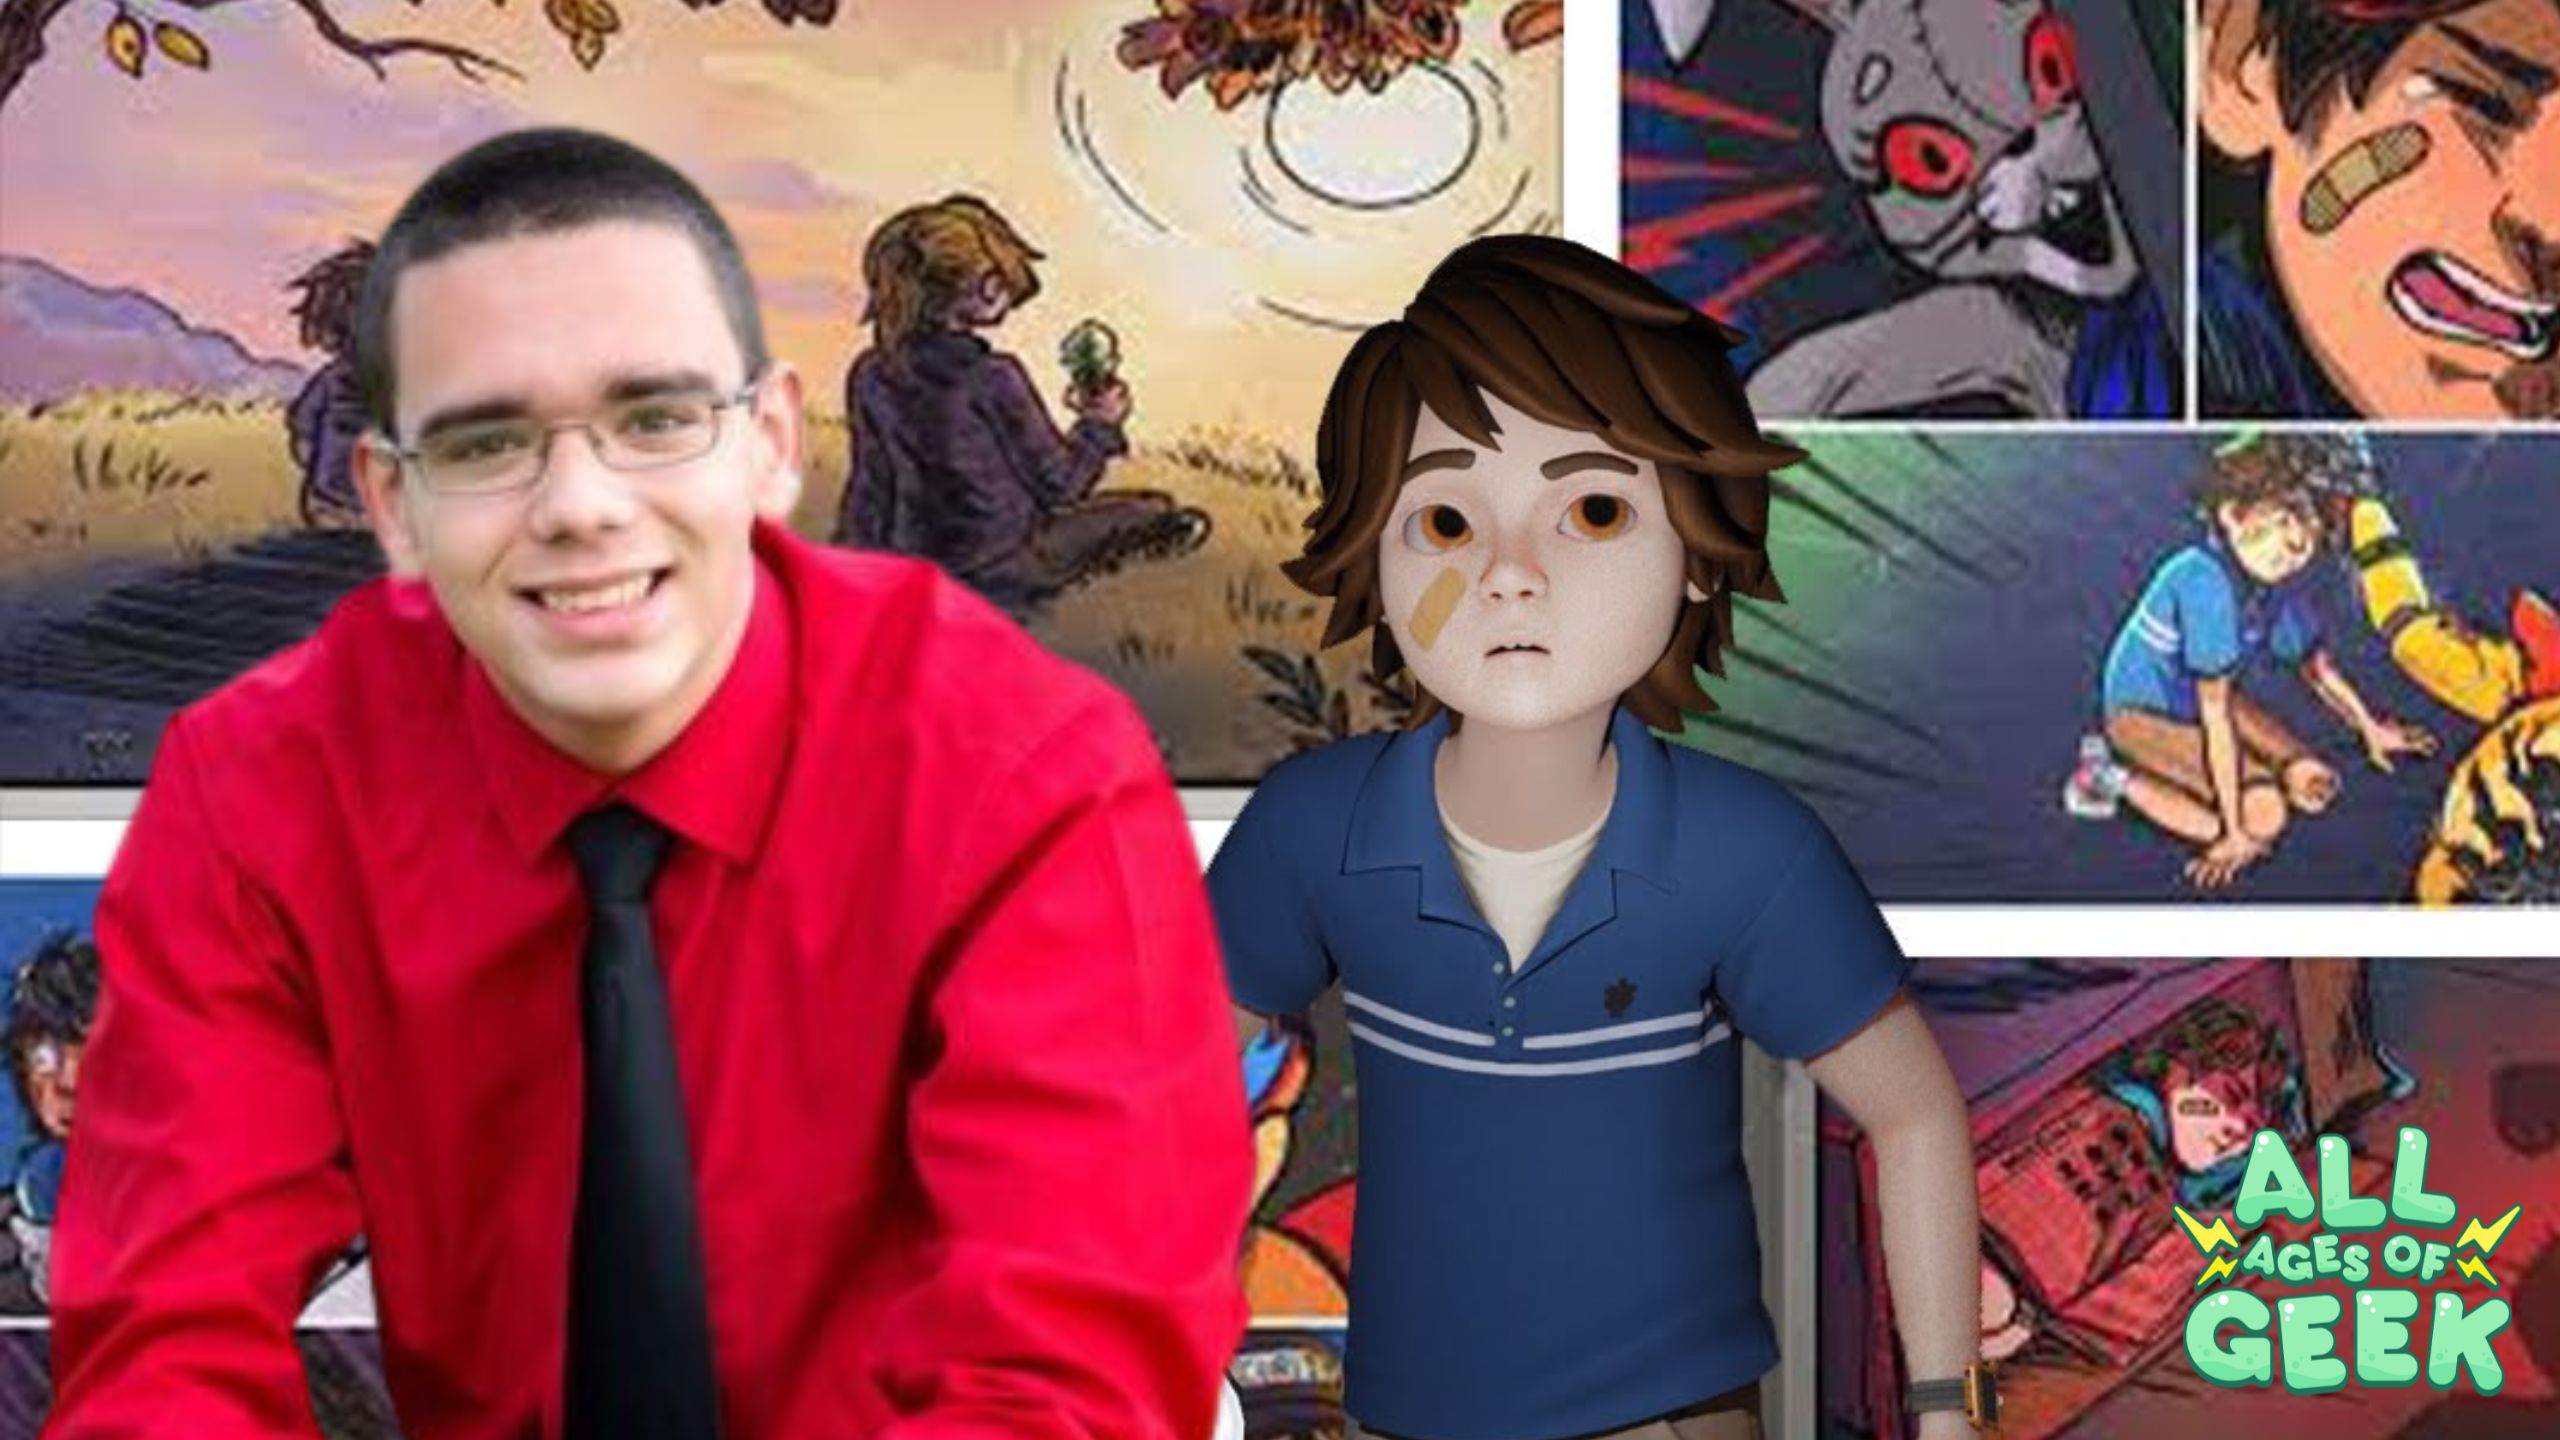 A composite image featuring a smiling man in a red shirt and black tie on the left, in front of an artistic, autumnal landscape background. To the right, a stylized digital avatar with brown hair and a blue shirt, featuring two bandages on the face, is superimposed. In the top right corner, there are smaller images of animated characters in dynamic poses. The "All Ages of Geek" logo with vibrant green and yellow colors is present in the bottom right corner, overlapping slightly with the avatar.